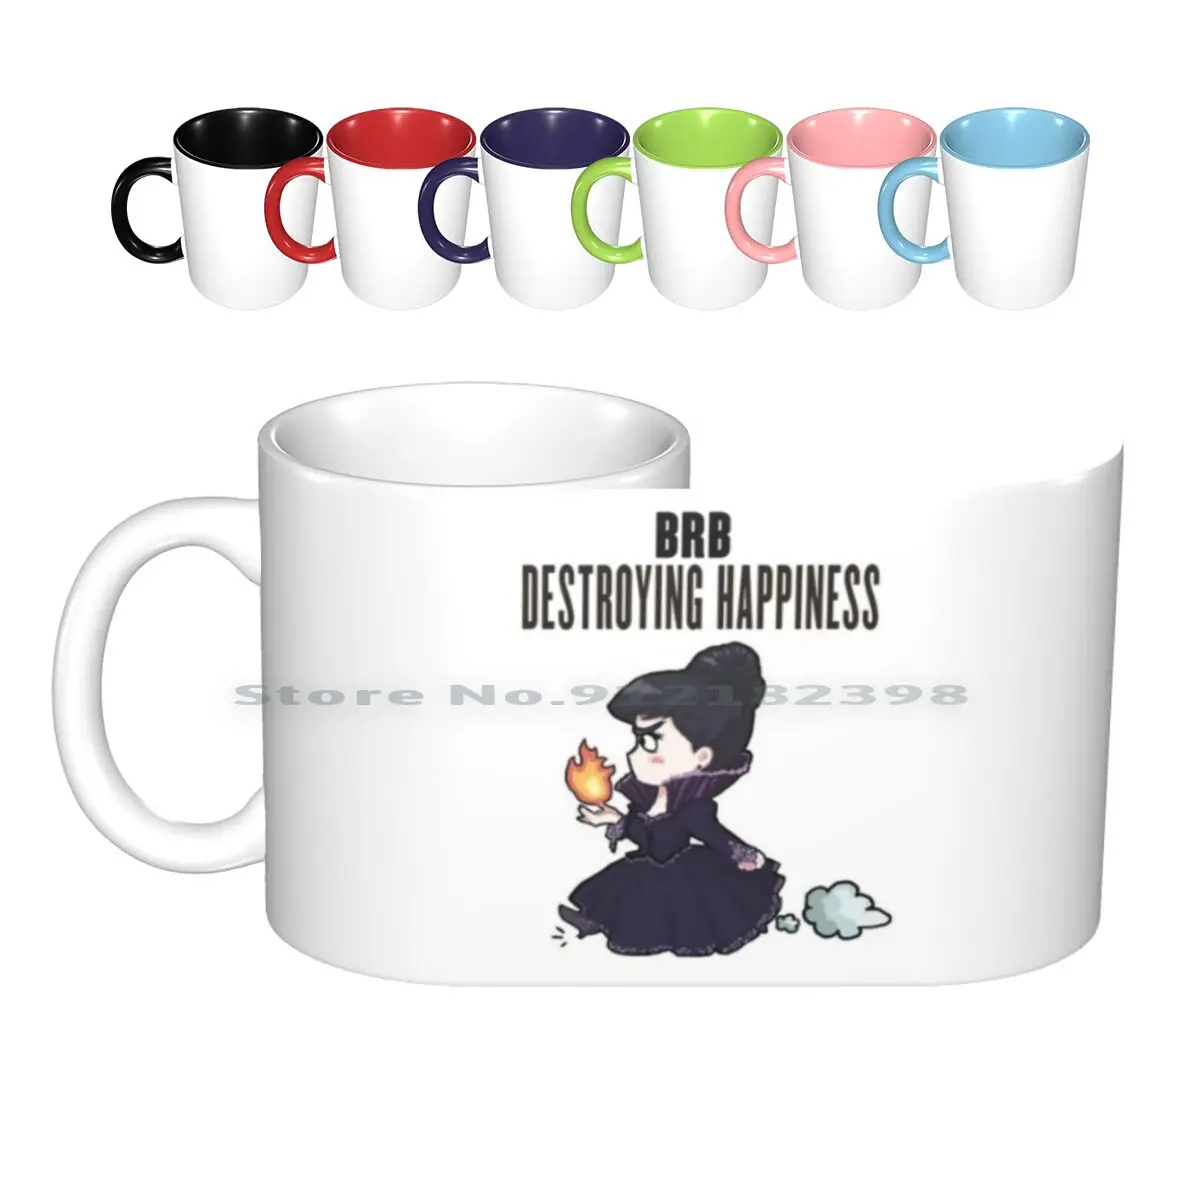 

Brb - - Destroying Happiness Ceramic Mugs Coffee Cups Milk Tea Mug Ouat Once Upon A Time Regina Mills Evil Queen Evil Regal Mayo